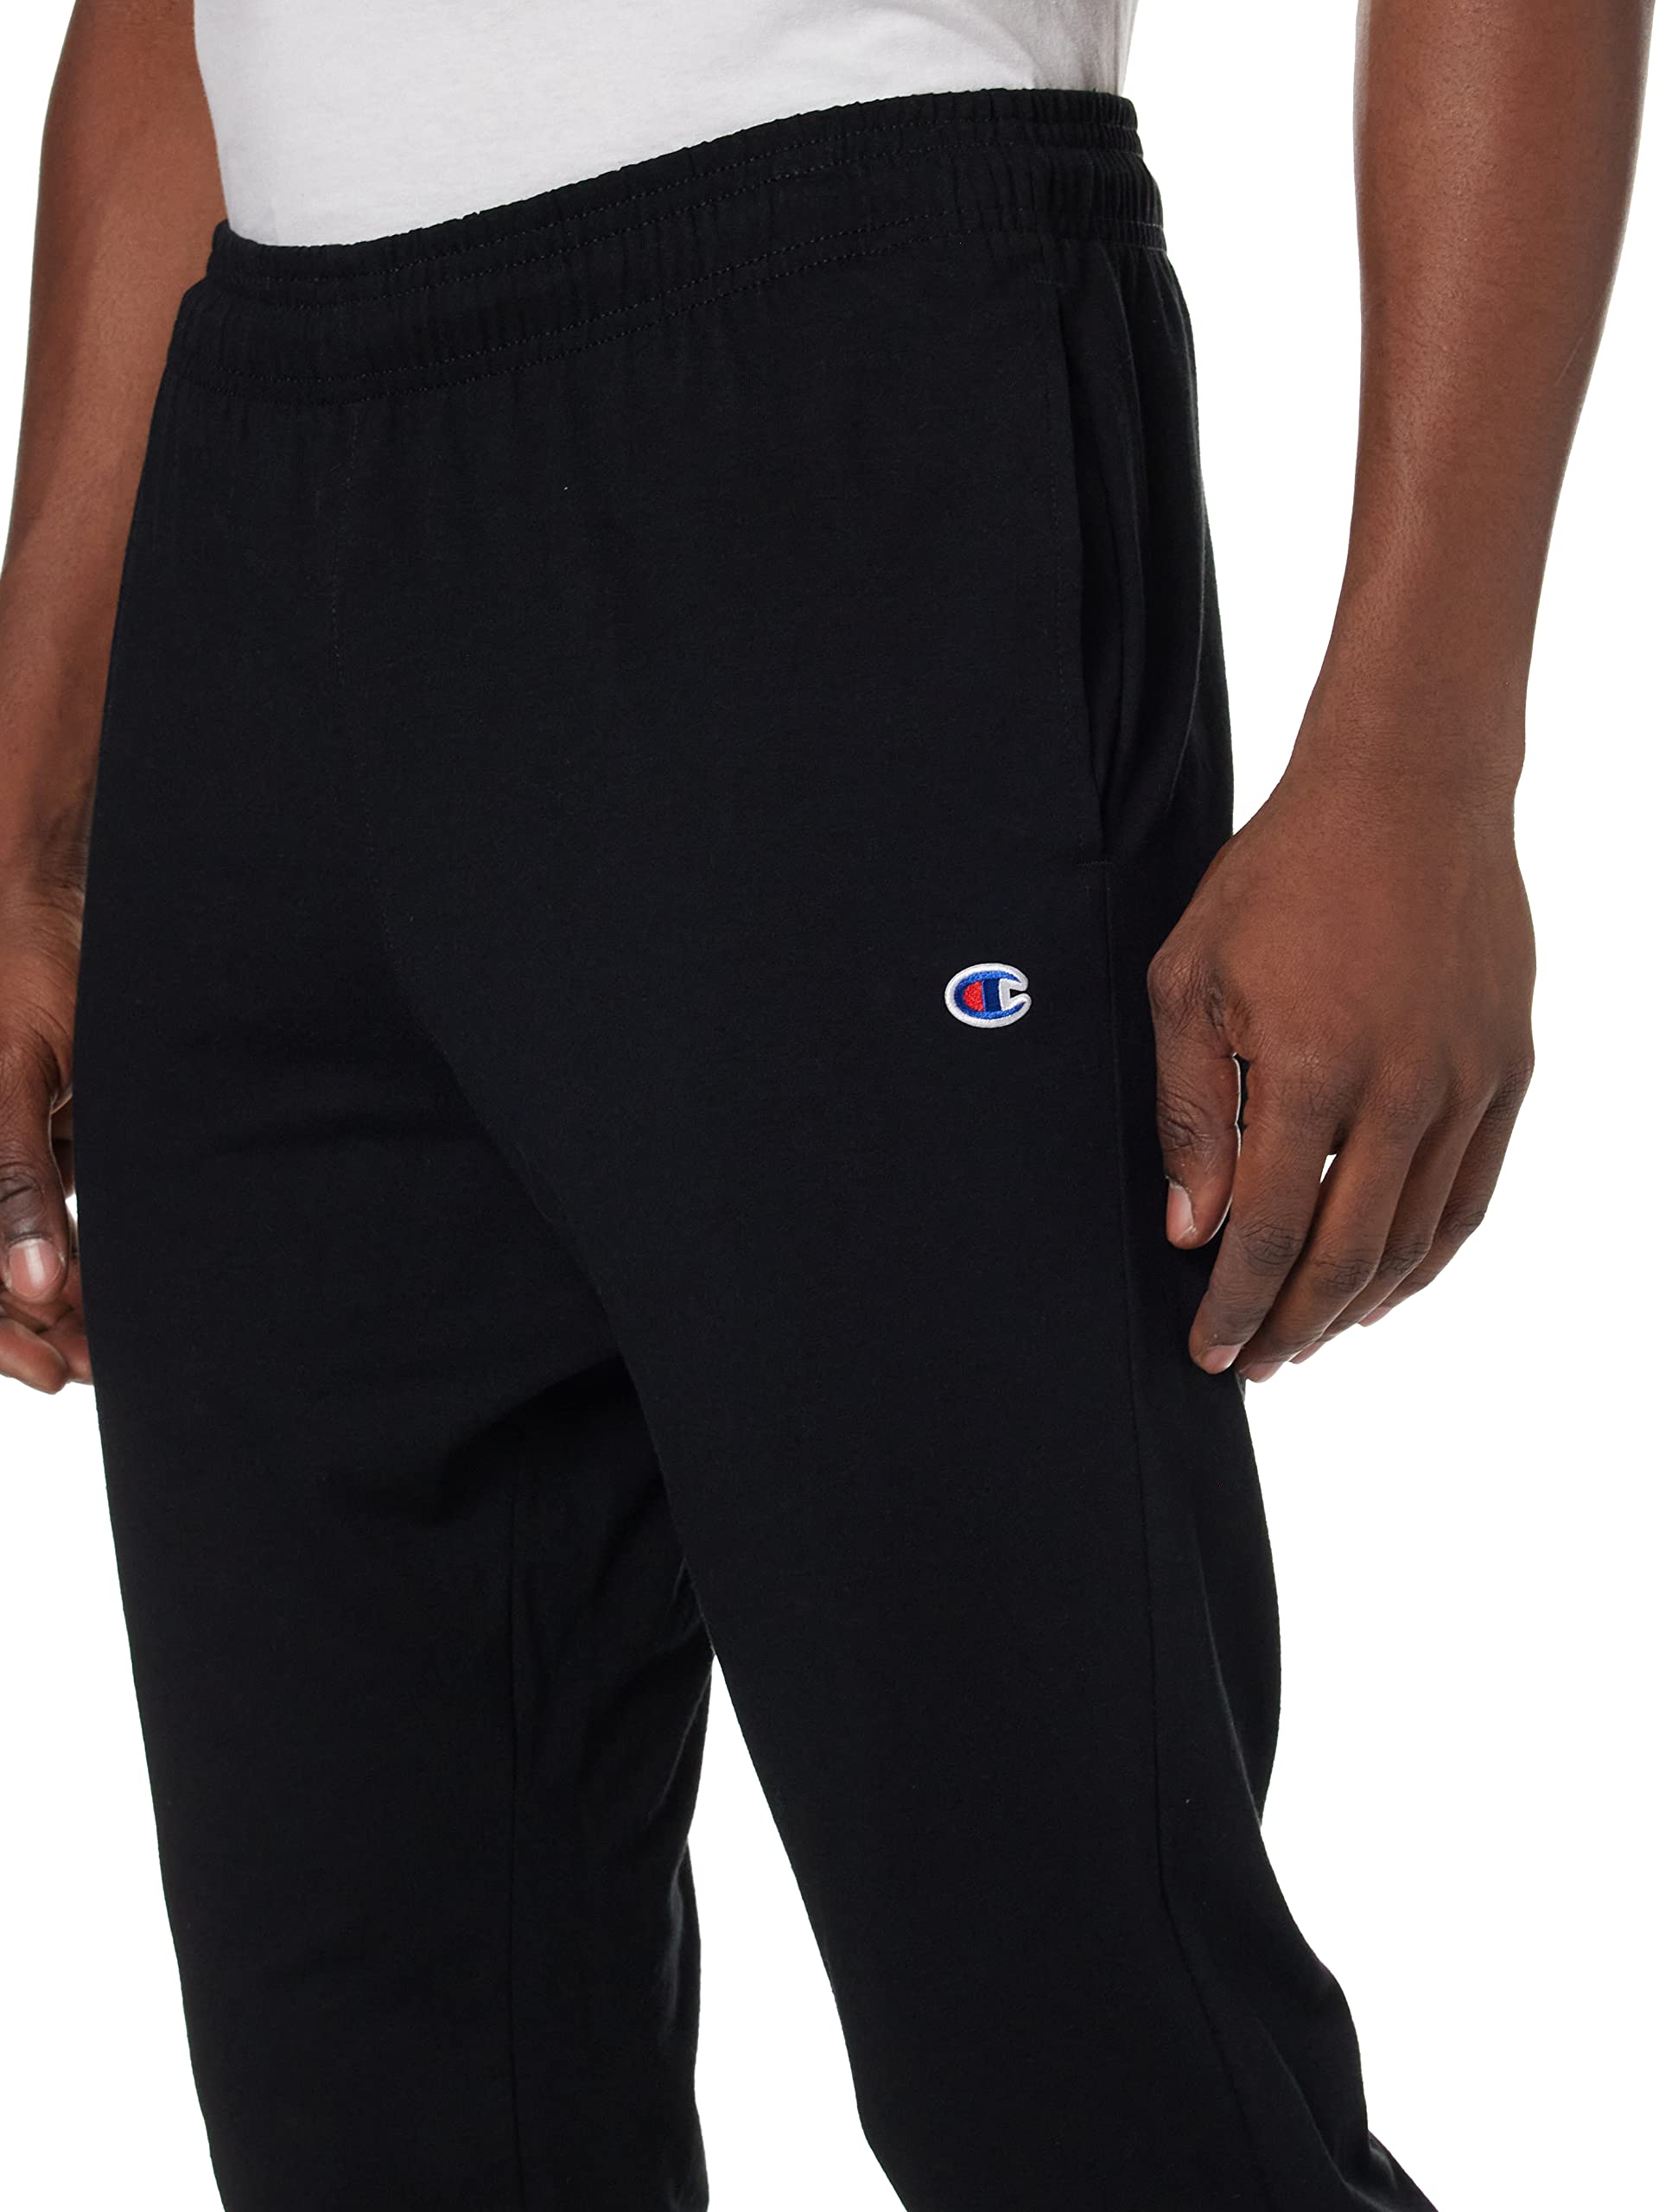 Champion Men's Joggers, Everyday Joggers, Lightweight, Comfortable Joggers for Men, 31